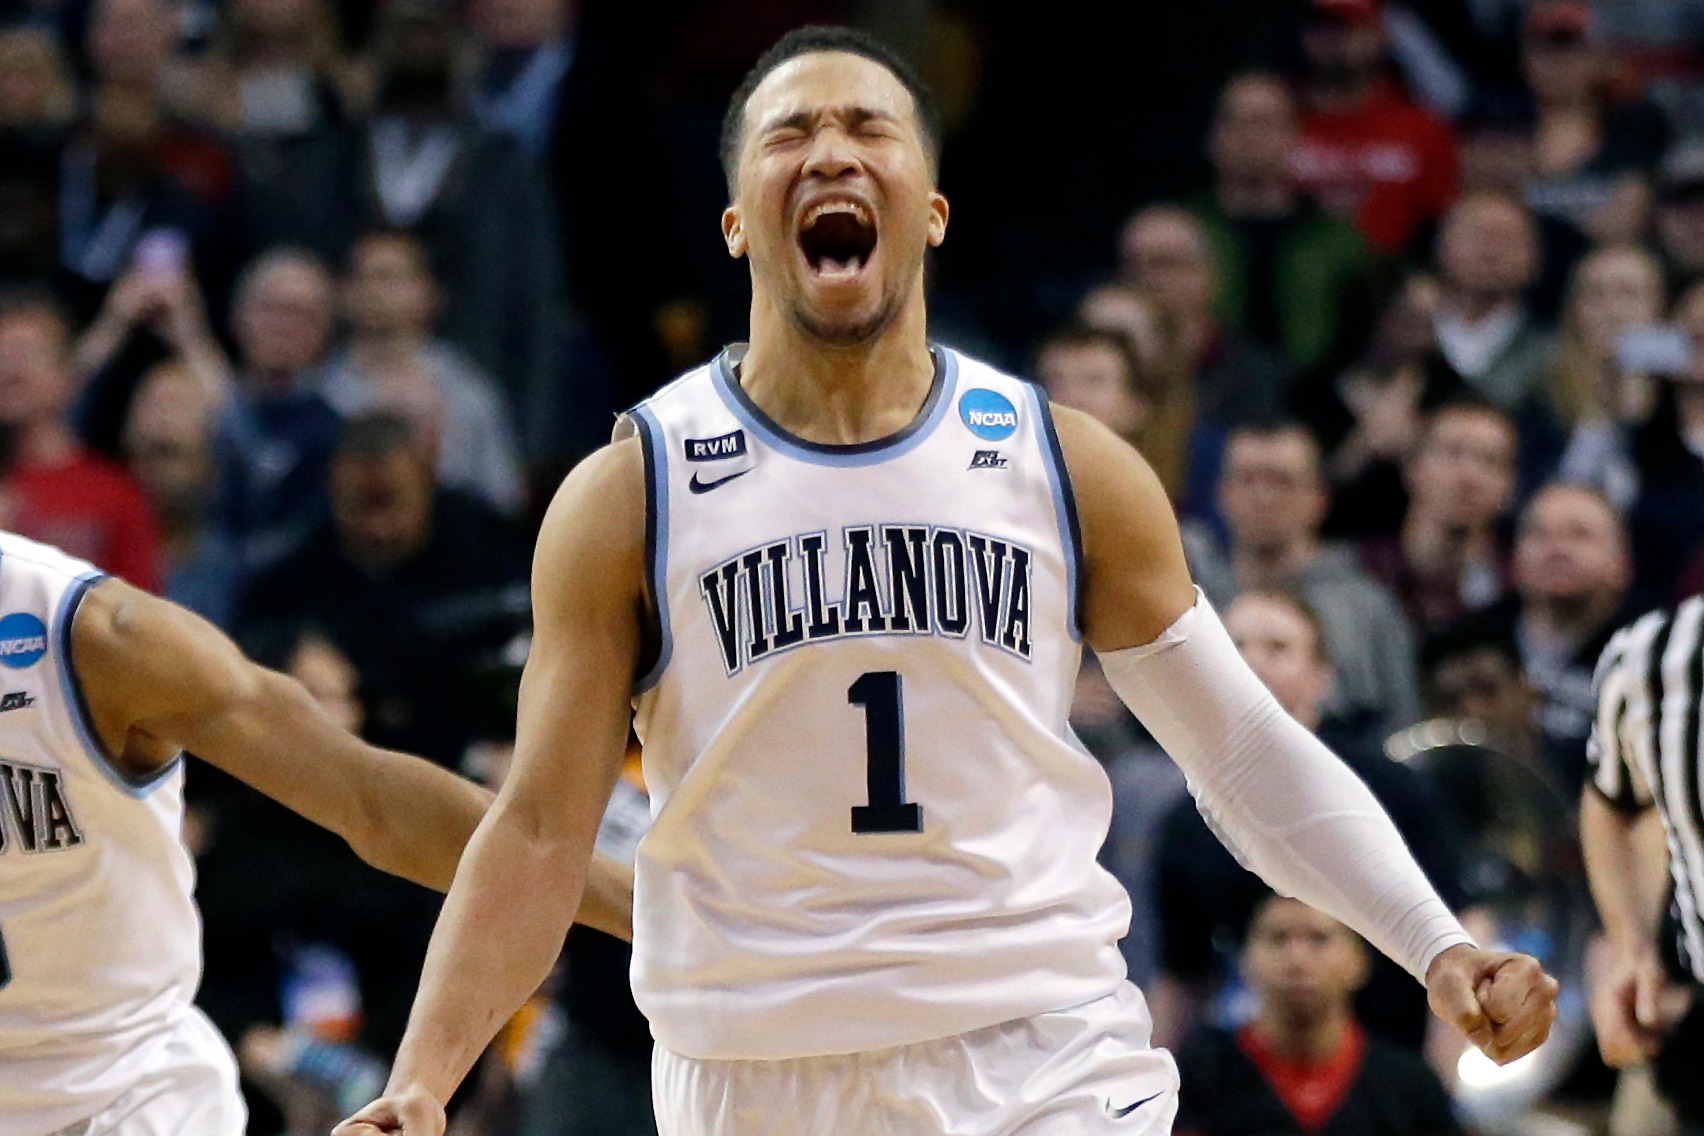 The Best Thing That Happened This Week: Jalen Brunson Is the AP Player